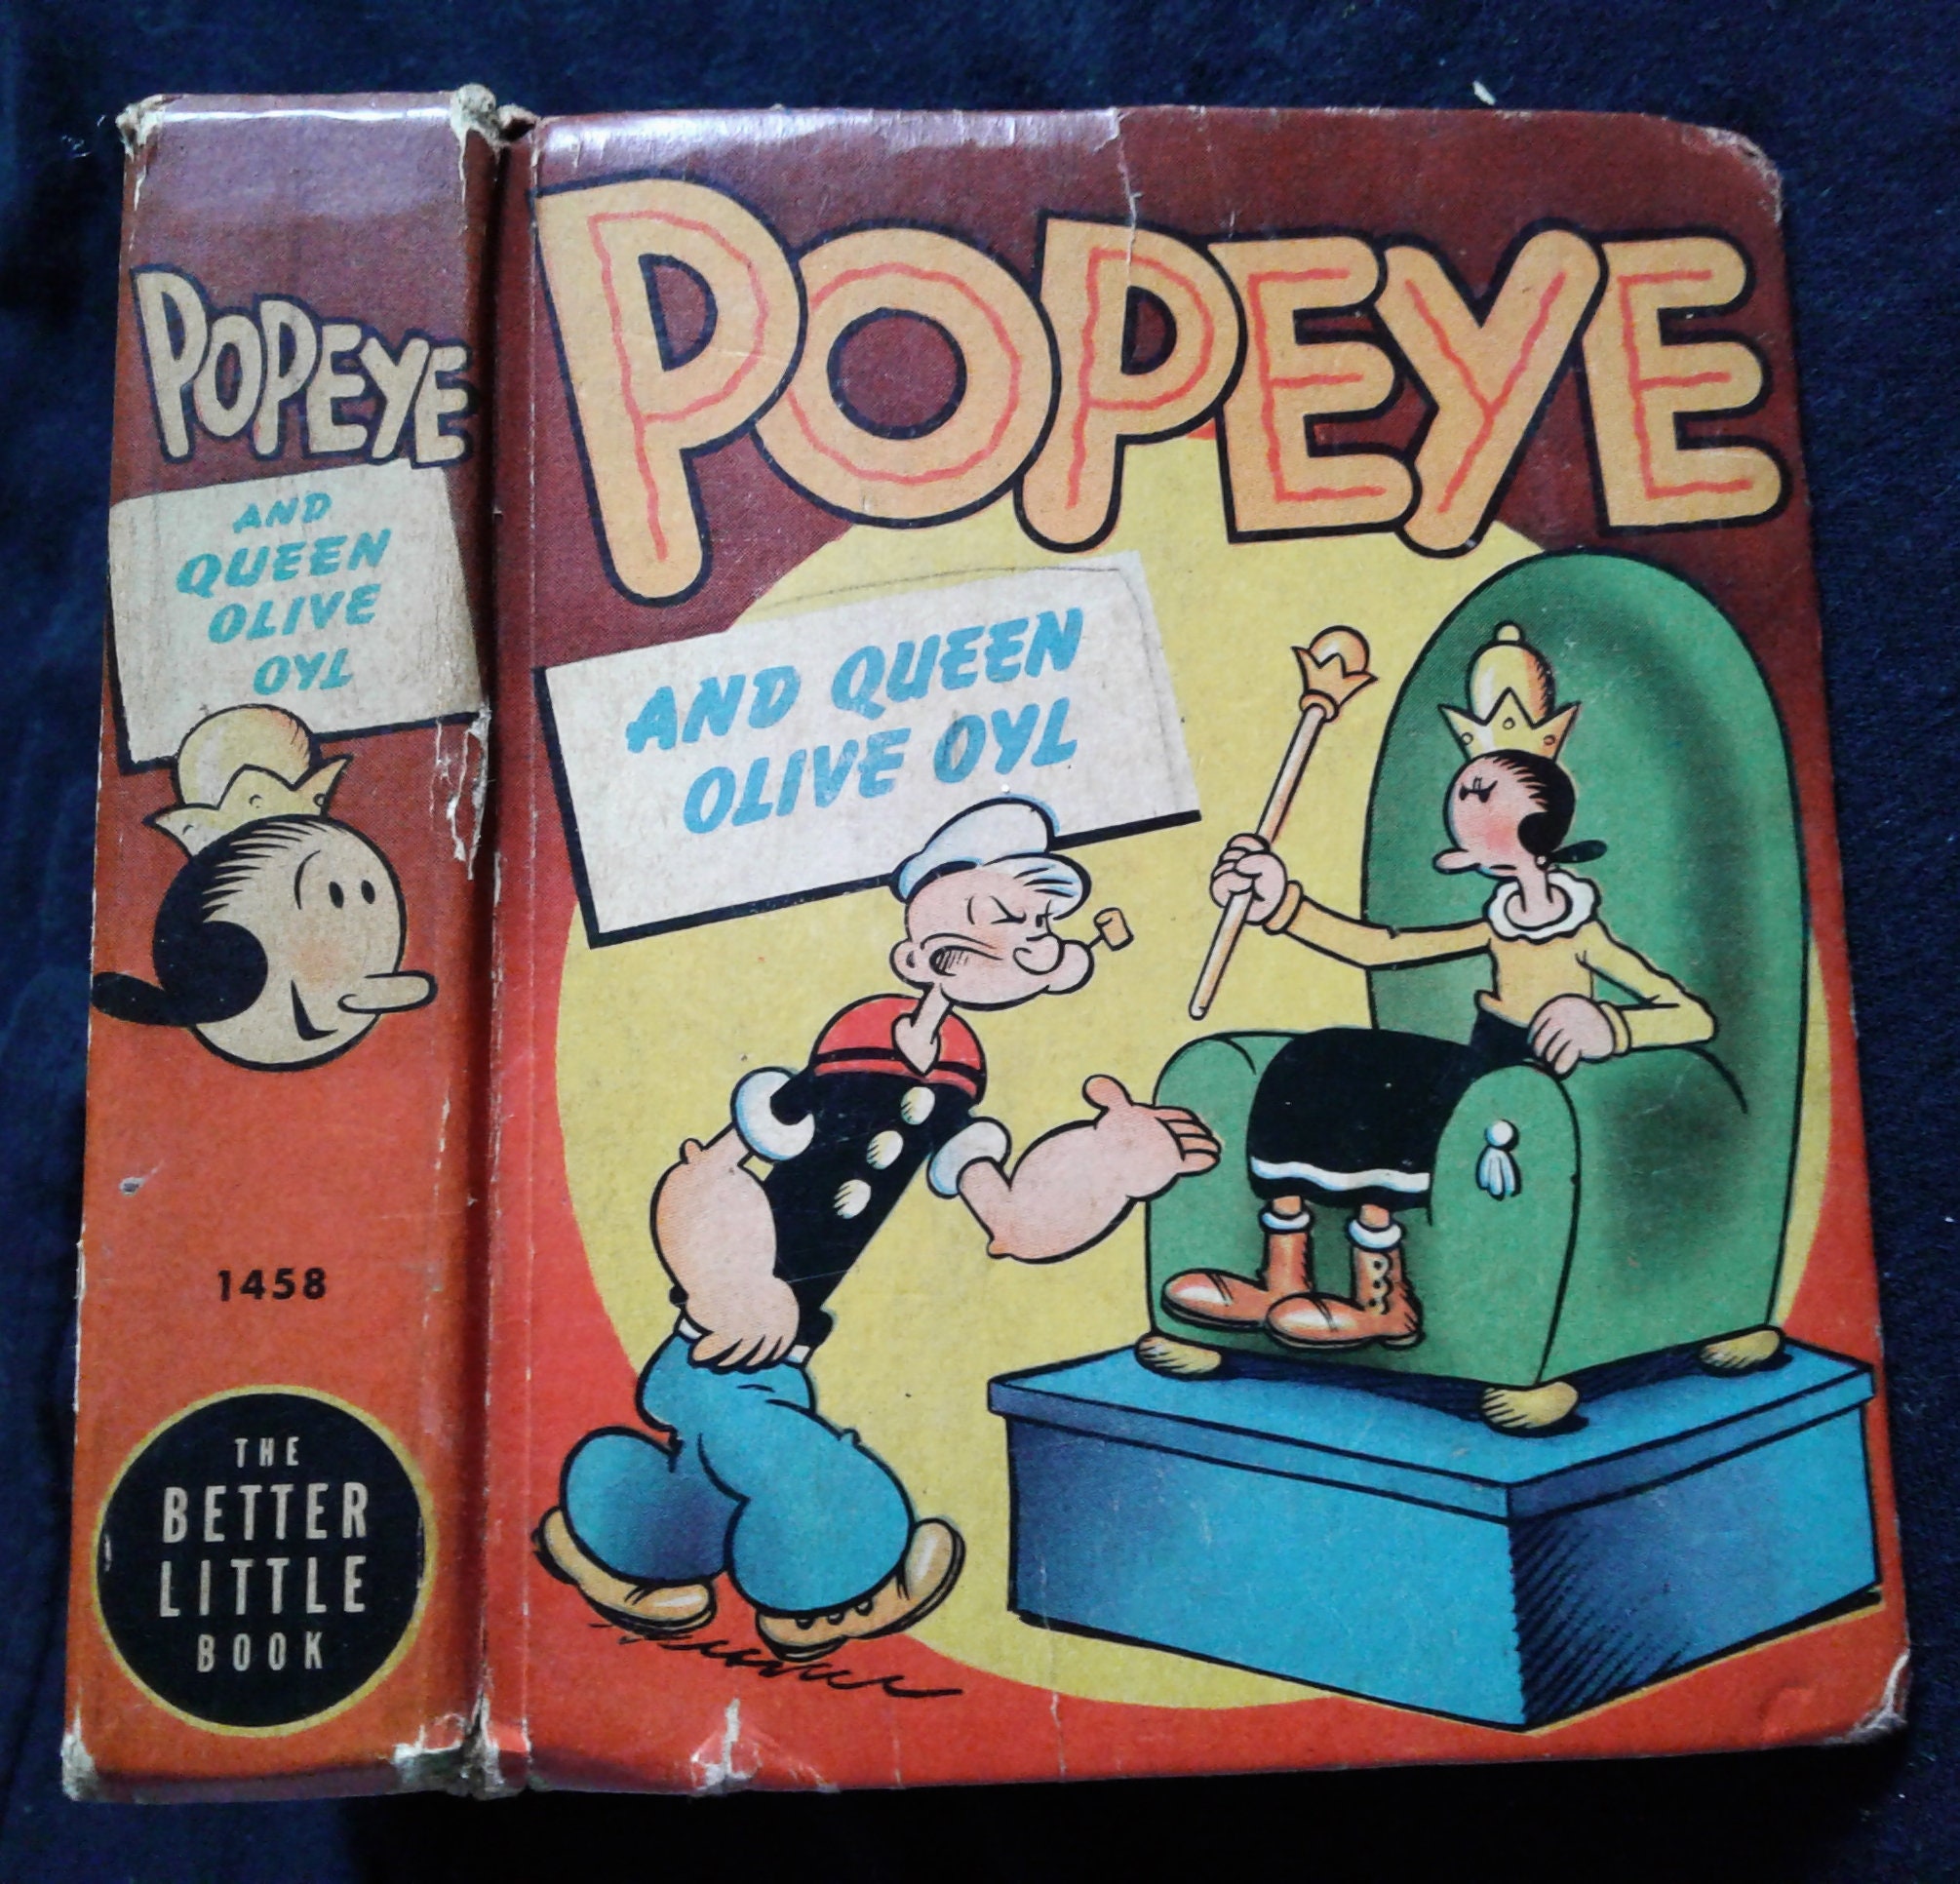 adrienne hampton recommends popeye and olive sex pic